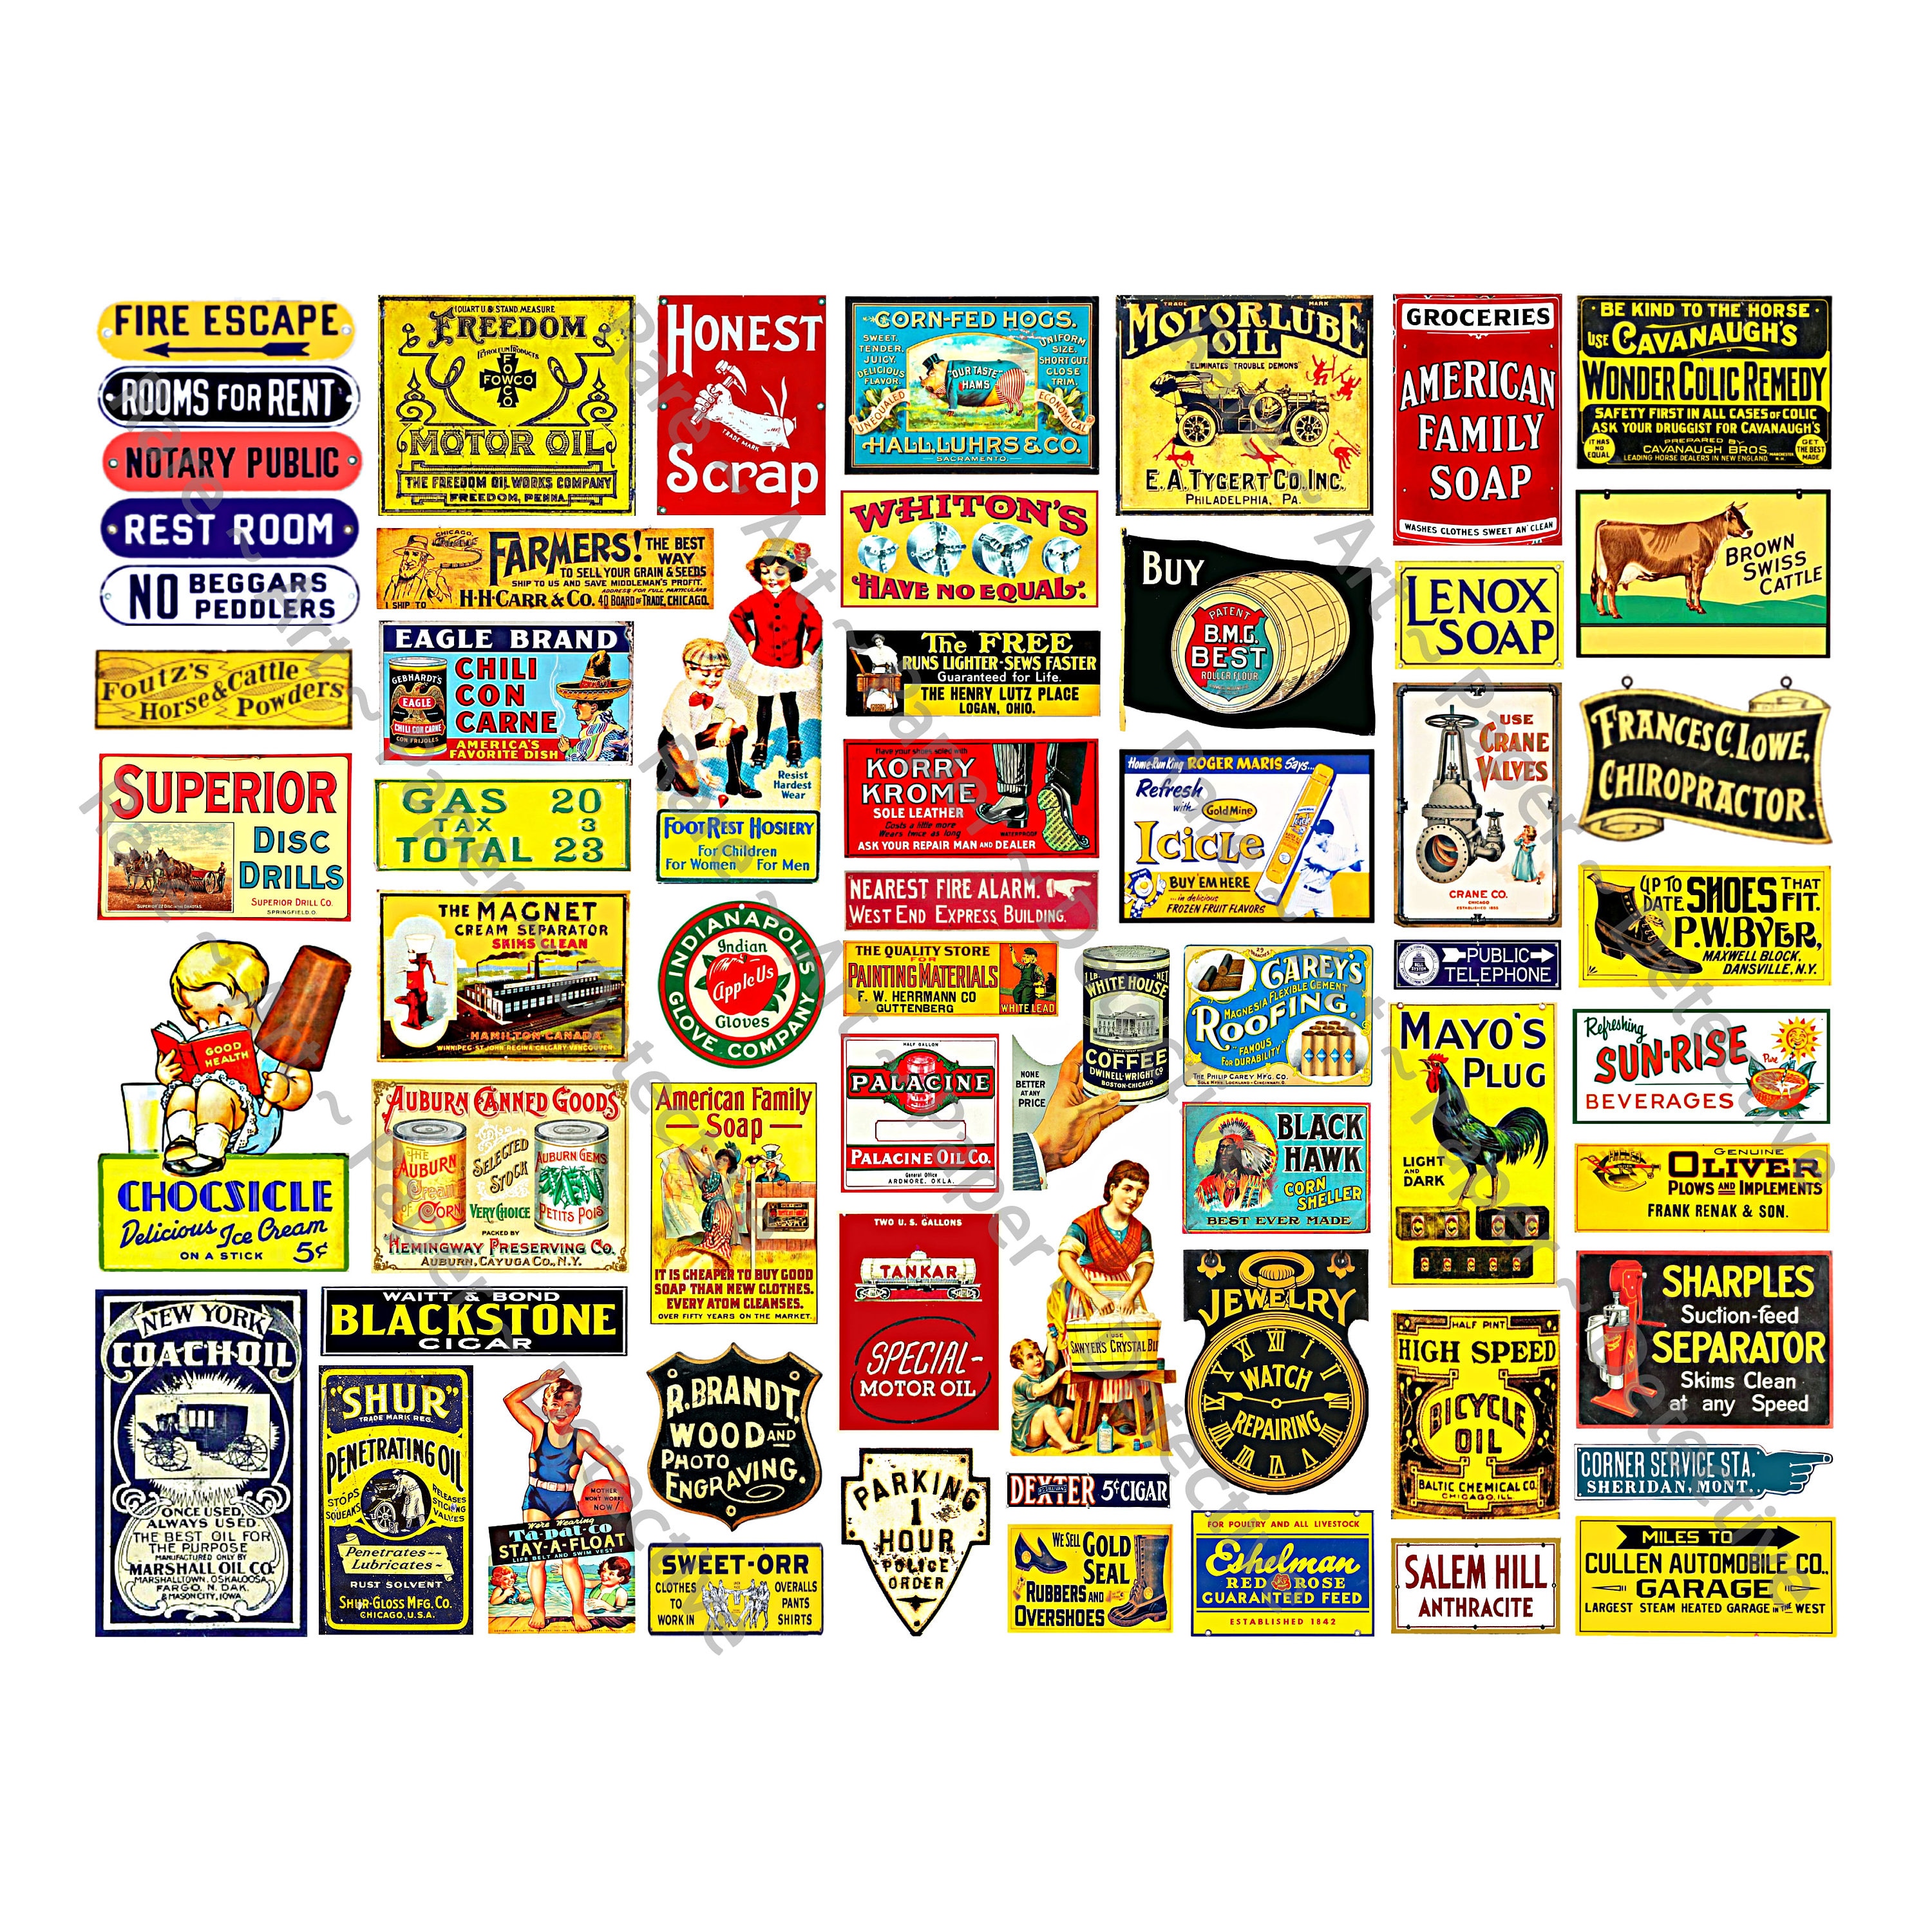 Apothecary Stickers, Pharmacy & Medicine Cabinet Labels, Vintage